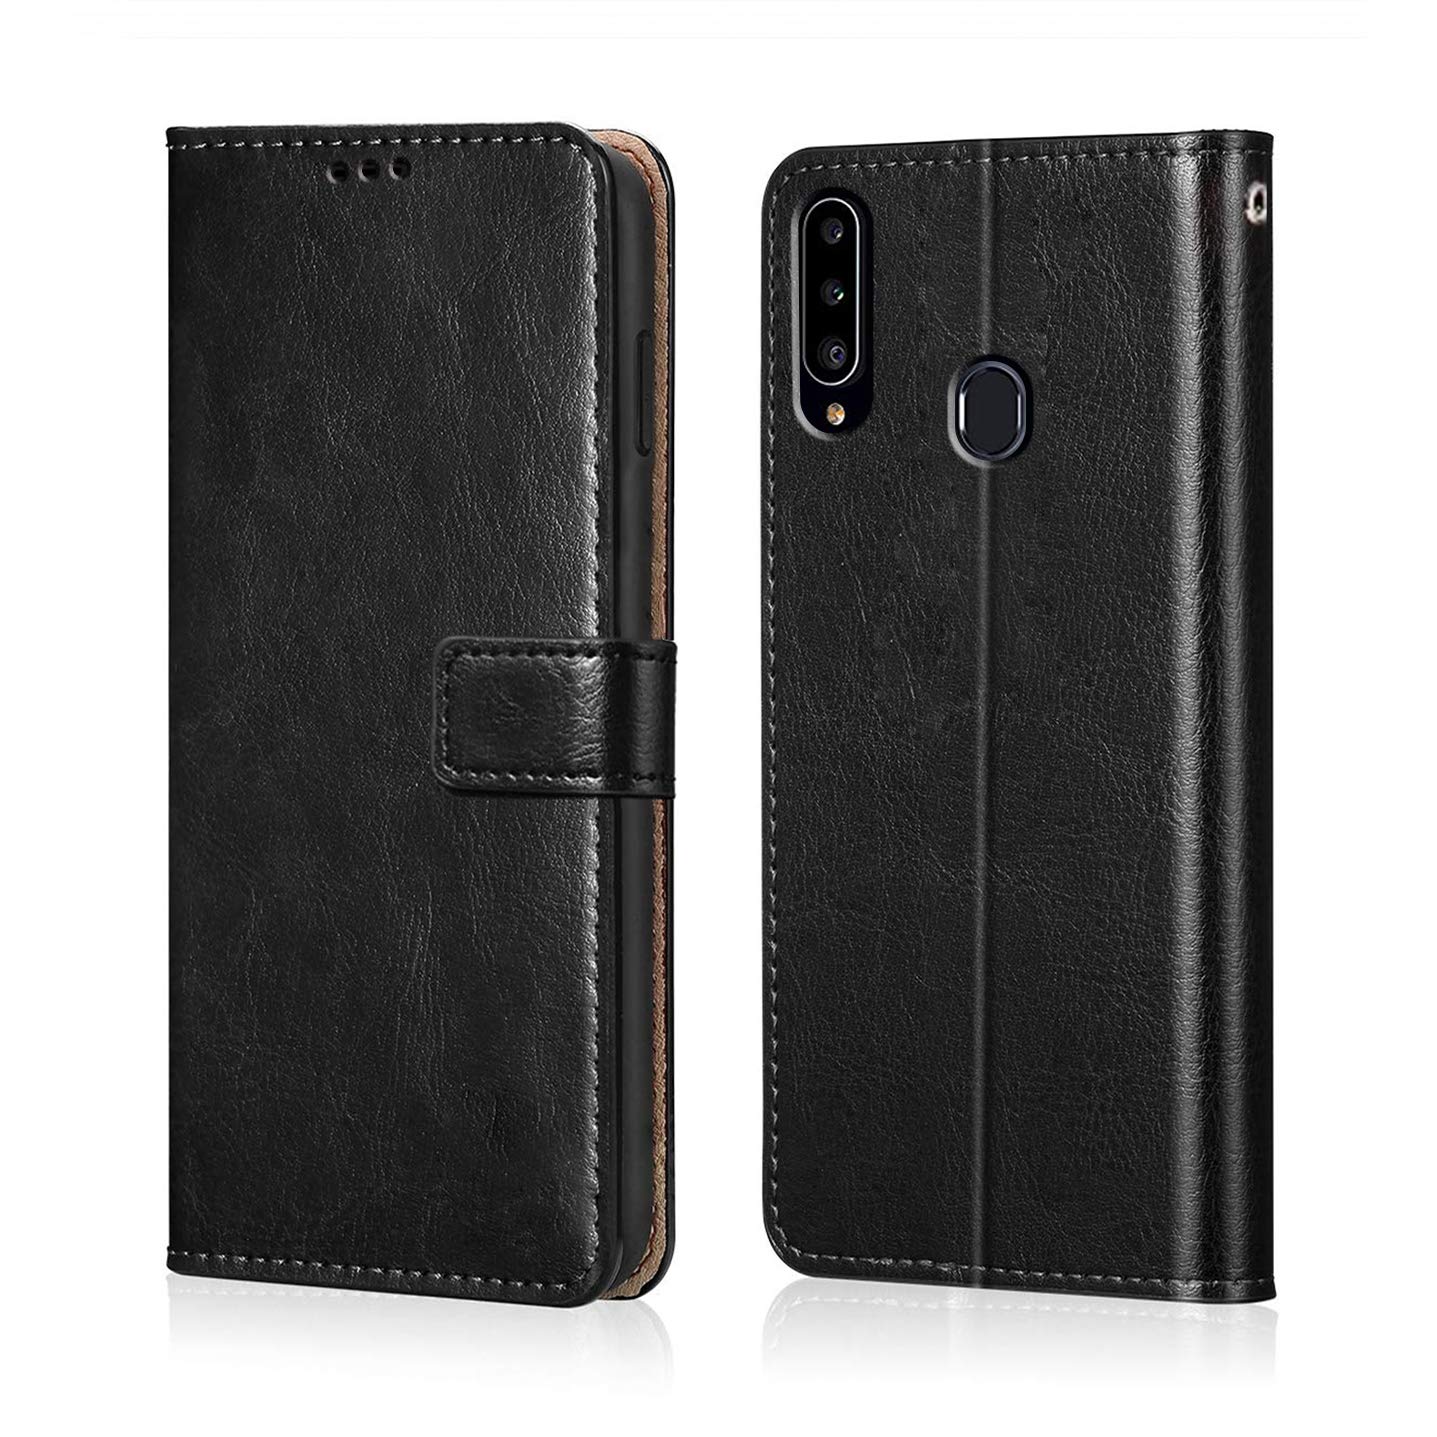 Buy Samsung Galaxy A20 Mobile Back Covers